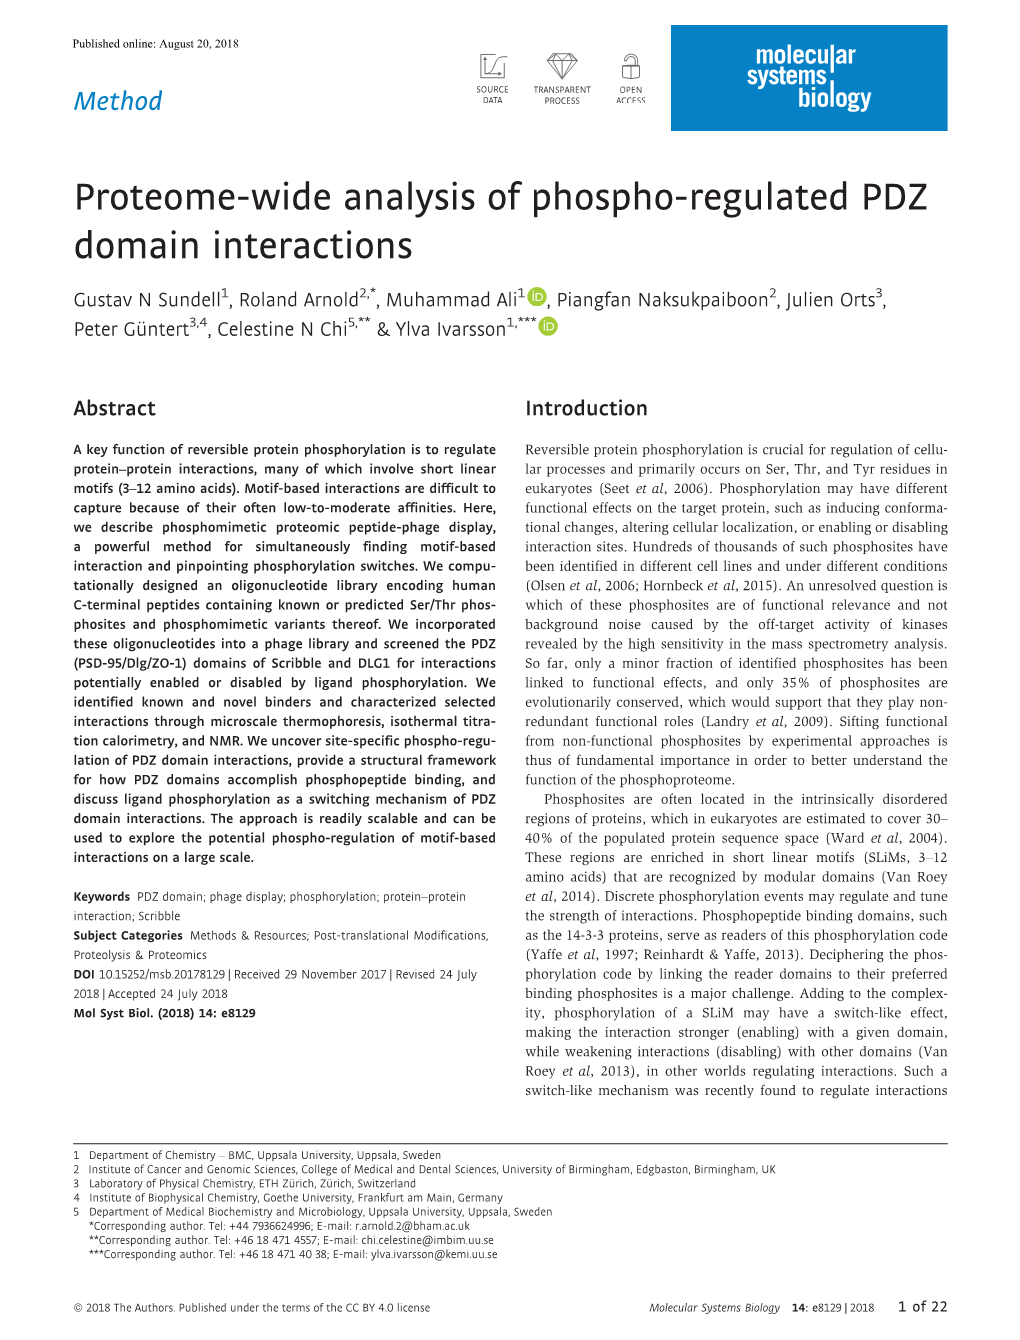 Proteome‐Wide Analysis of Phospho‐Regulated PDZ Domain Interactions